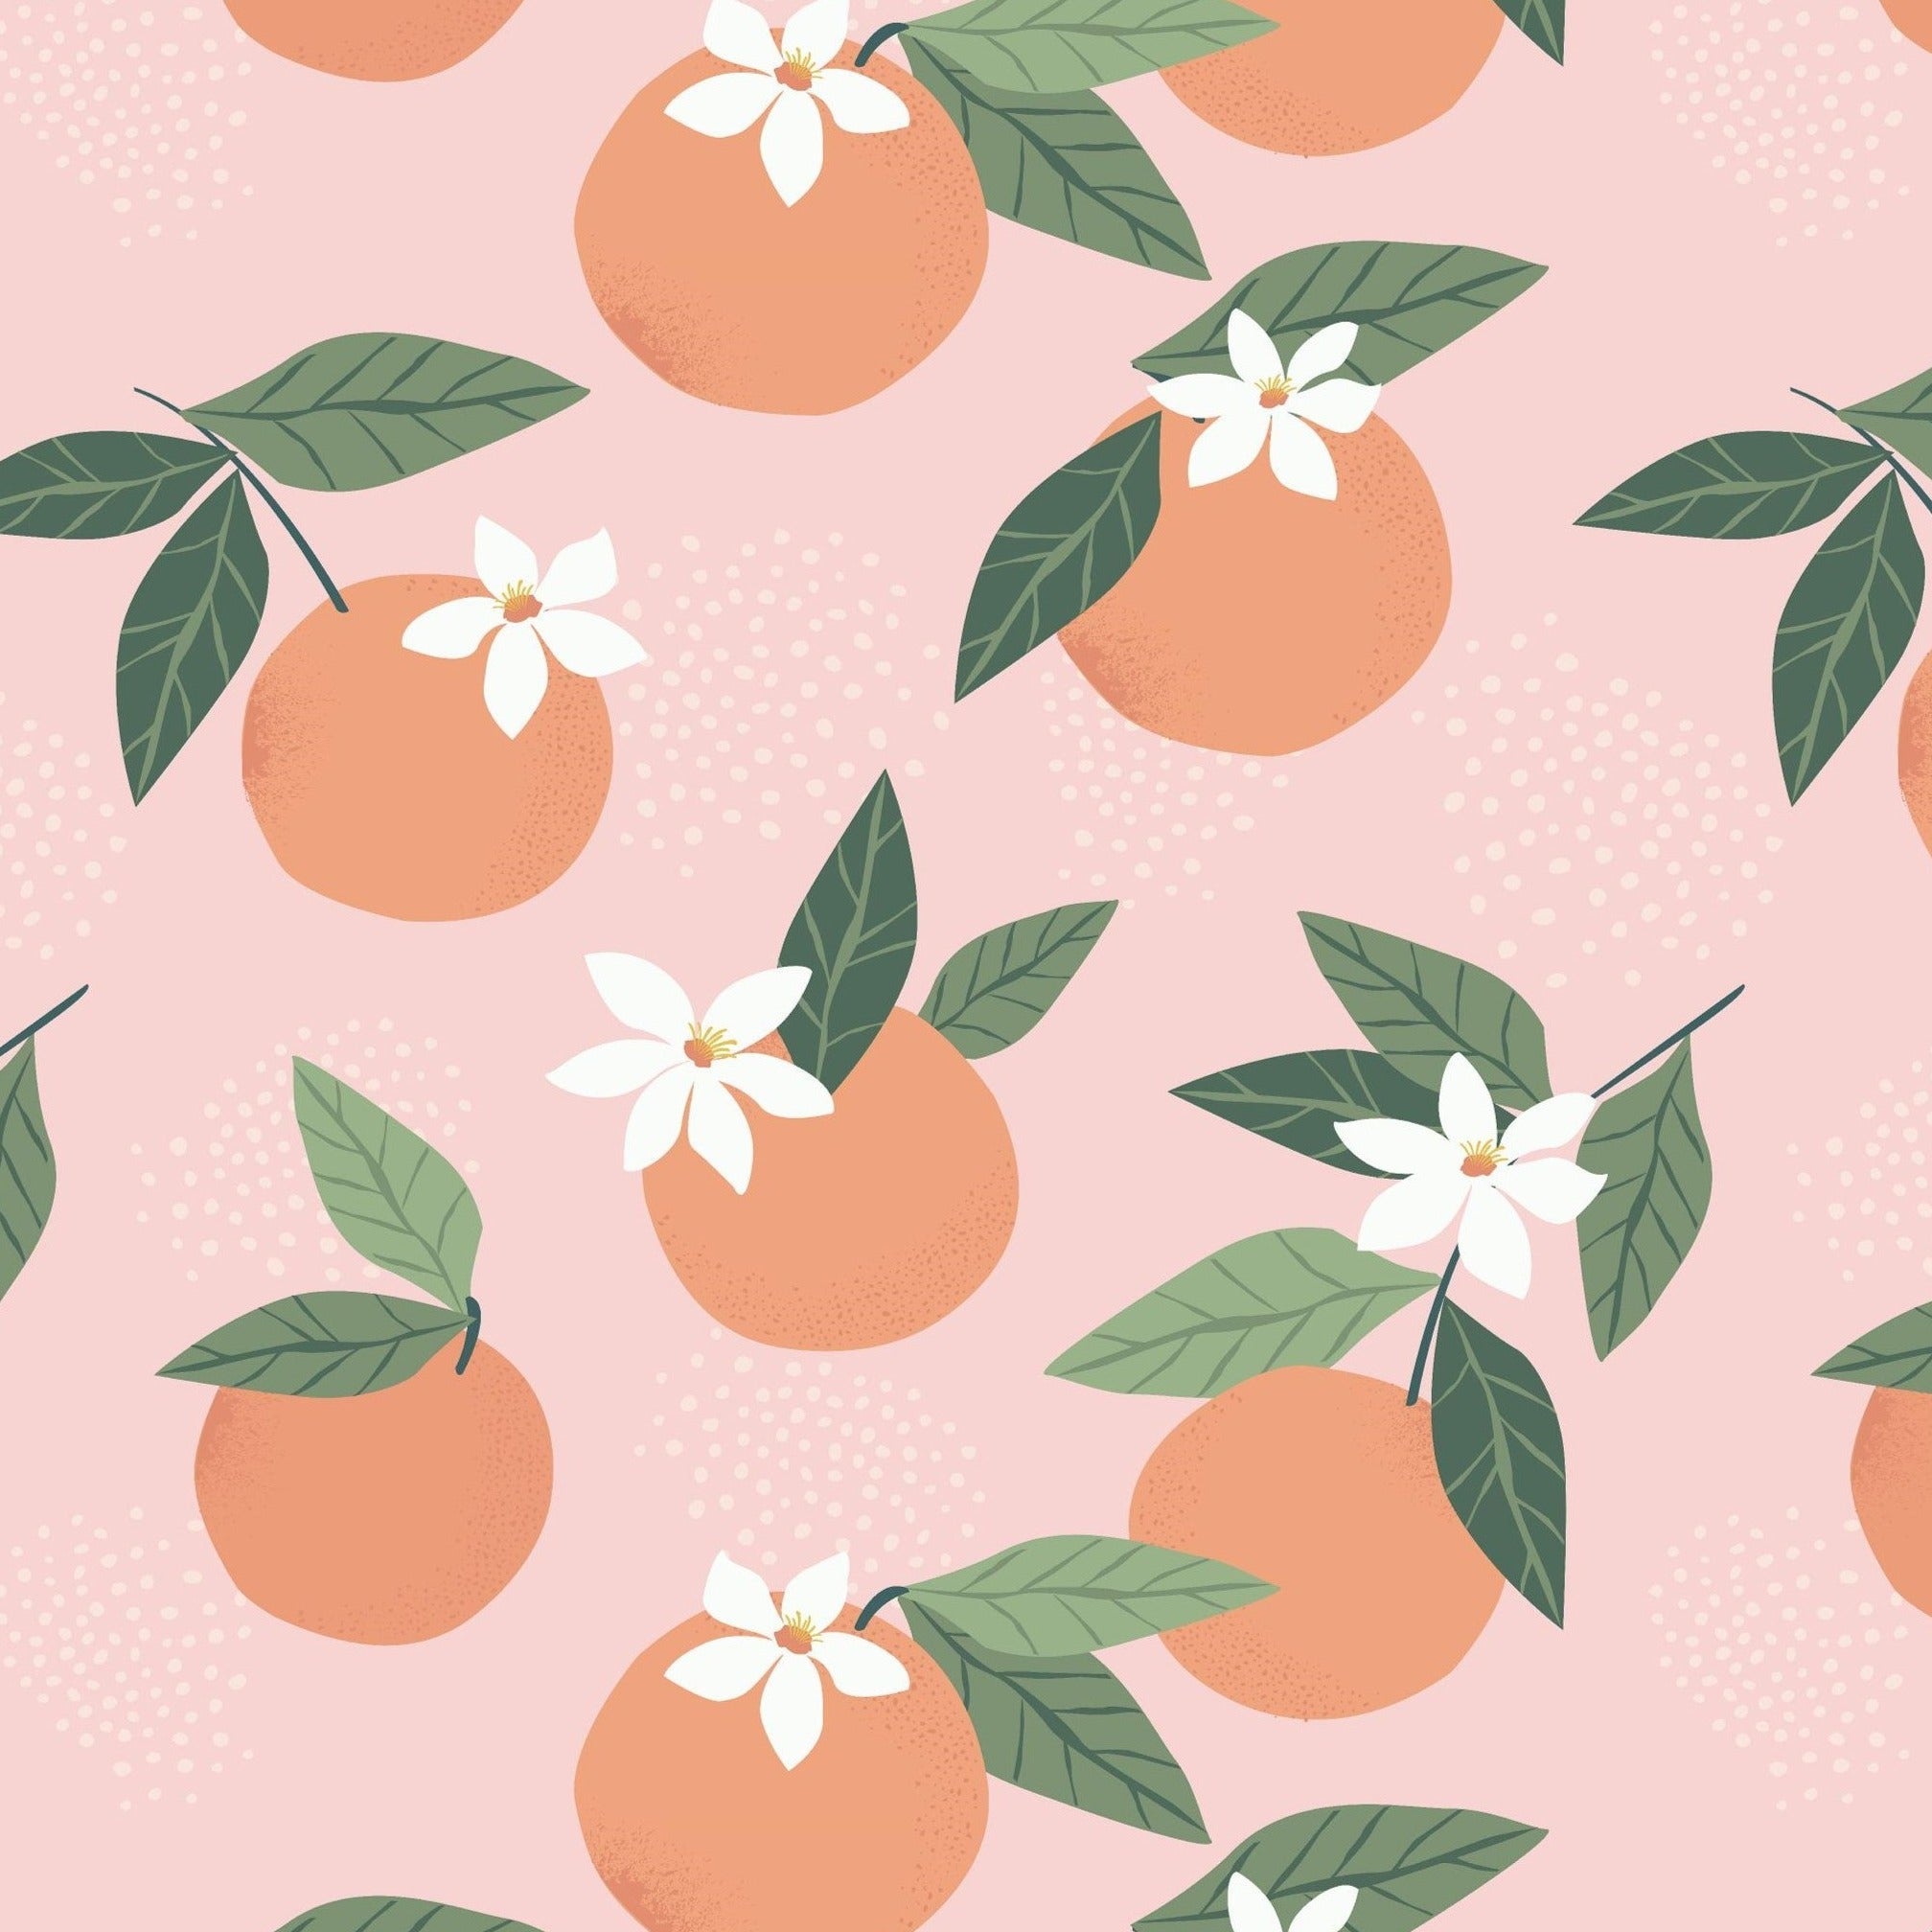 Sample tropical orange fruit wallpaper peel and stick with green leaves, removable wallpapers